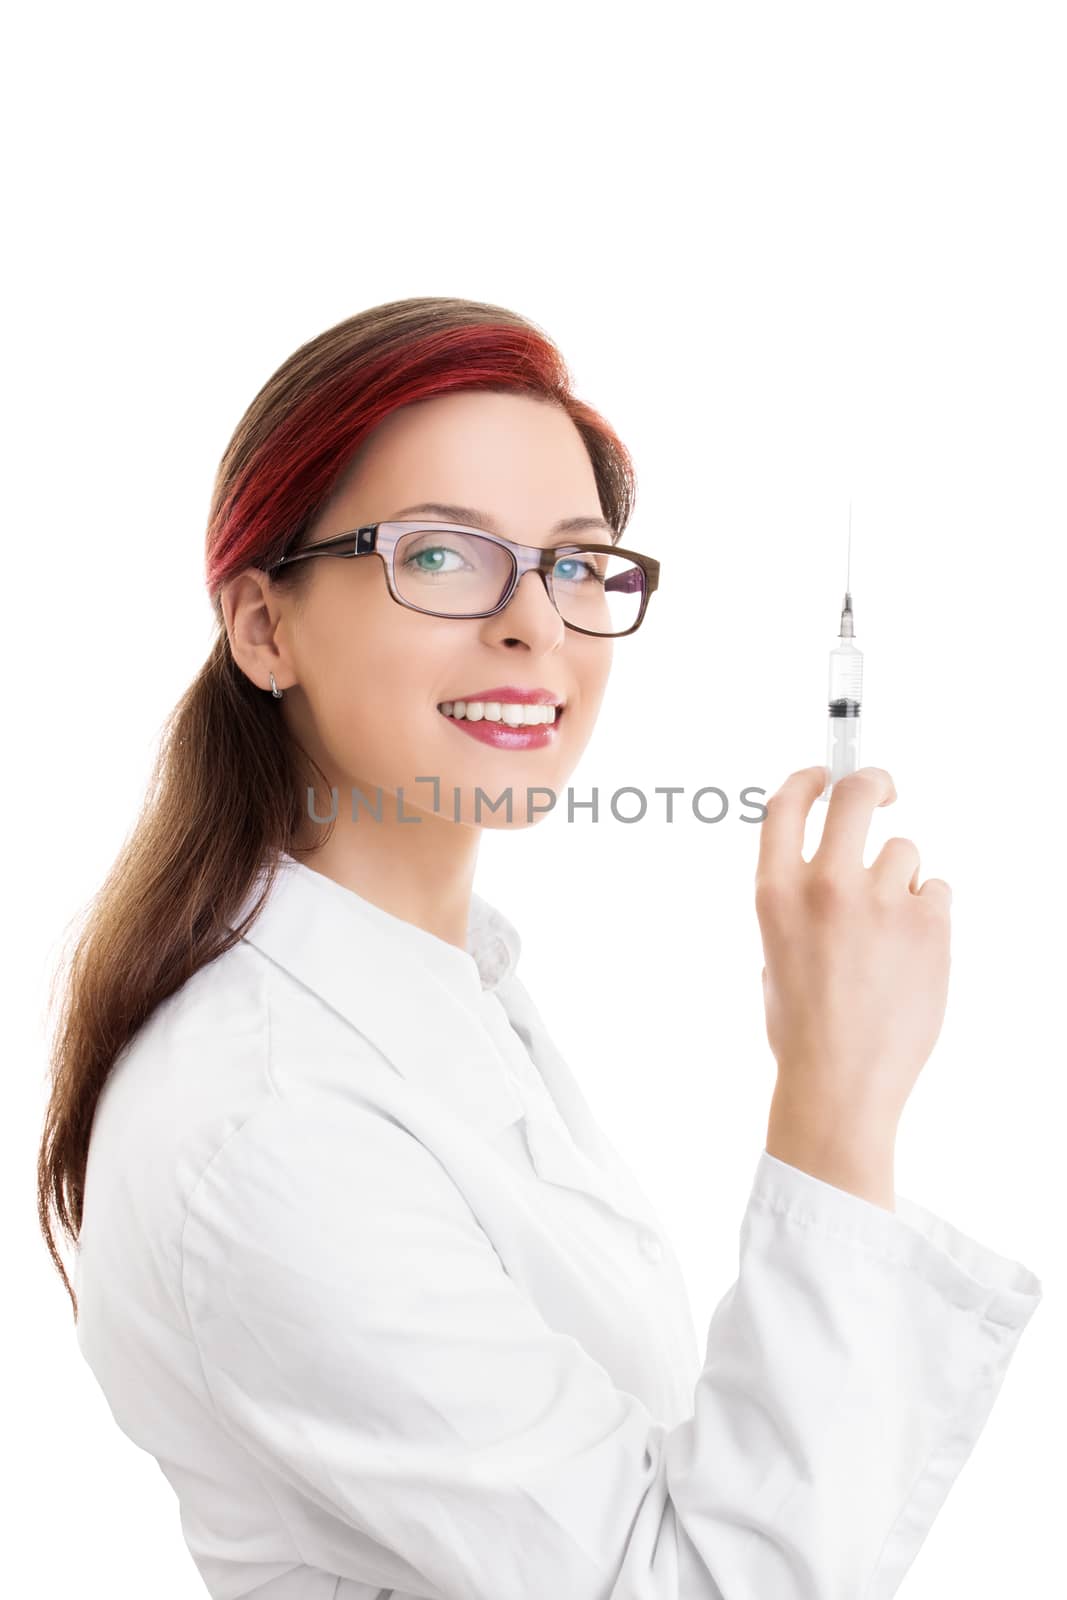 Vaccine, immunization, vaccination concept. Close up shot of a beautiful smiling young female doctor with glasses holding a syringe with needle, isolated on white background. Healthcare concept.